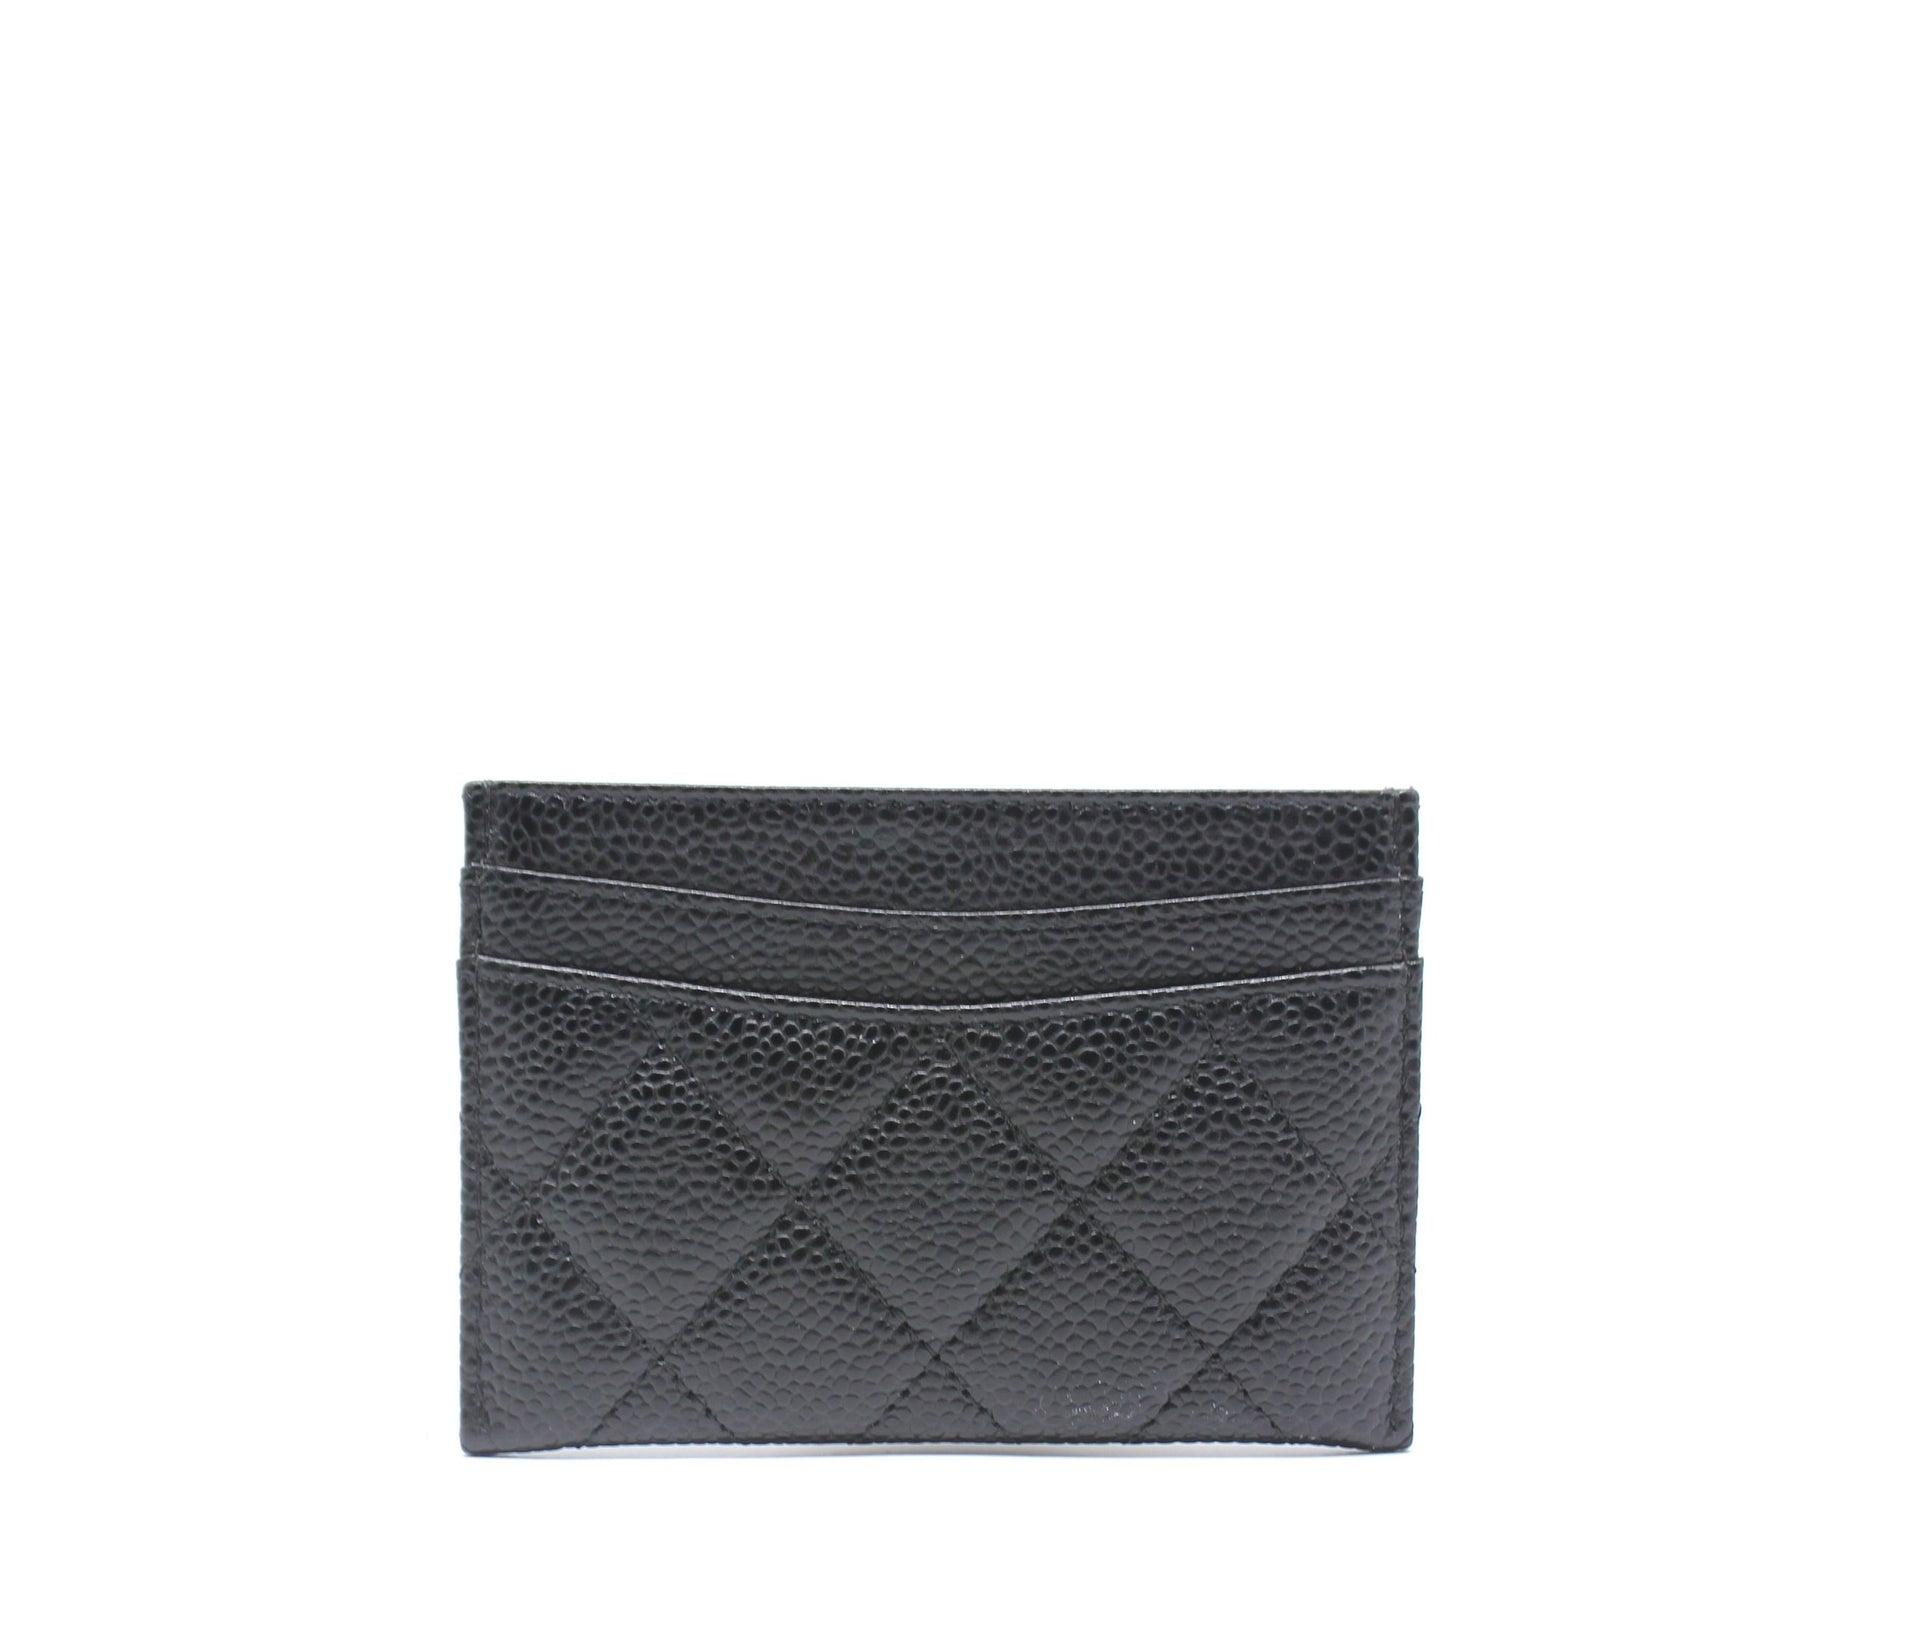 CHANEL Caviar Quilted CC Zip Card Holder Black | FASHIONPHILE